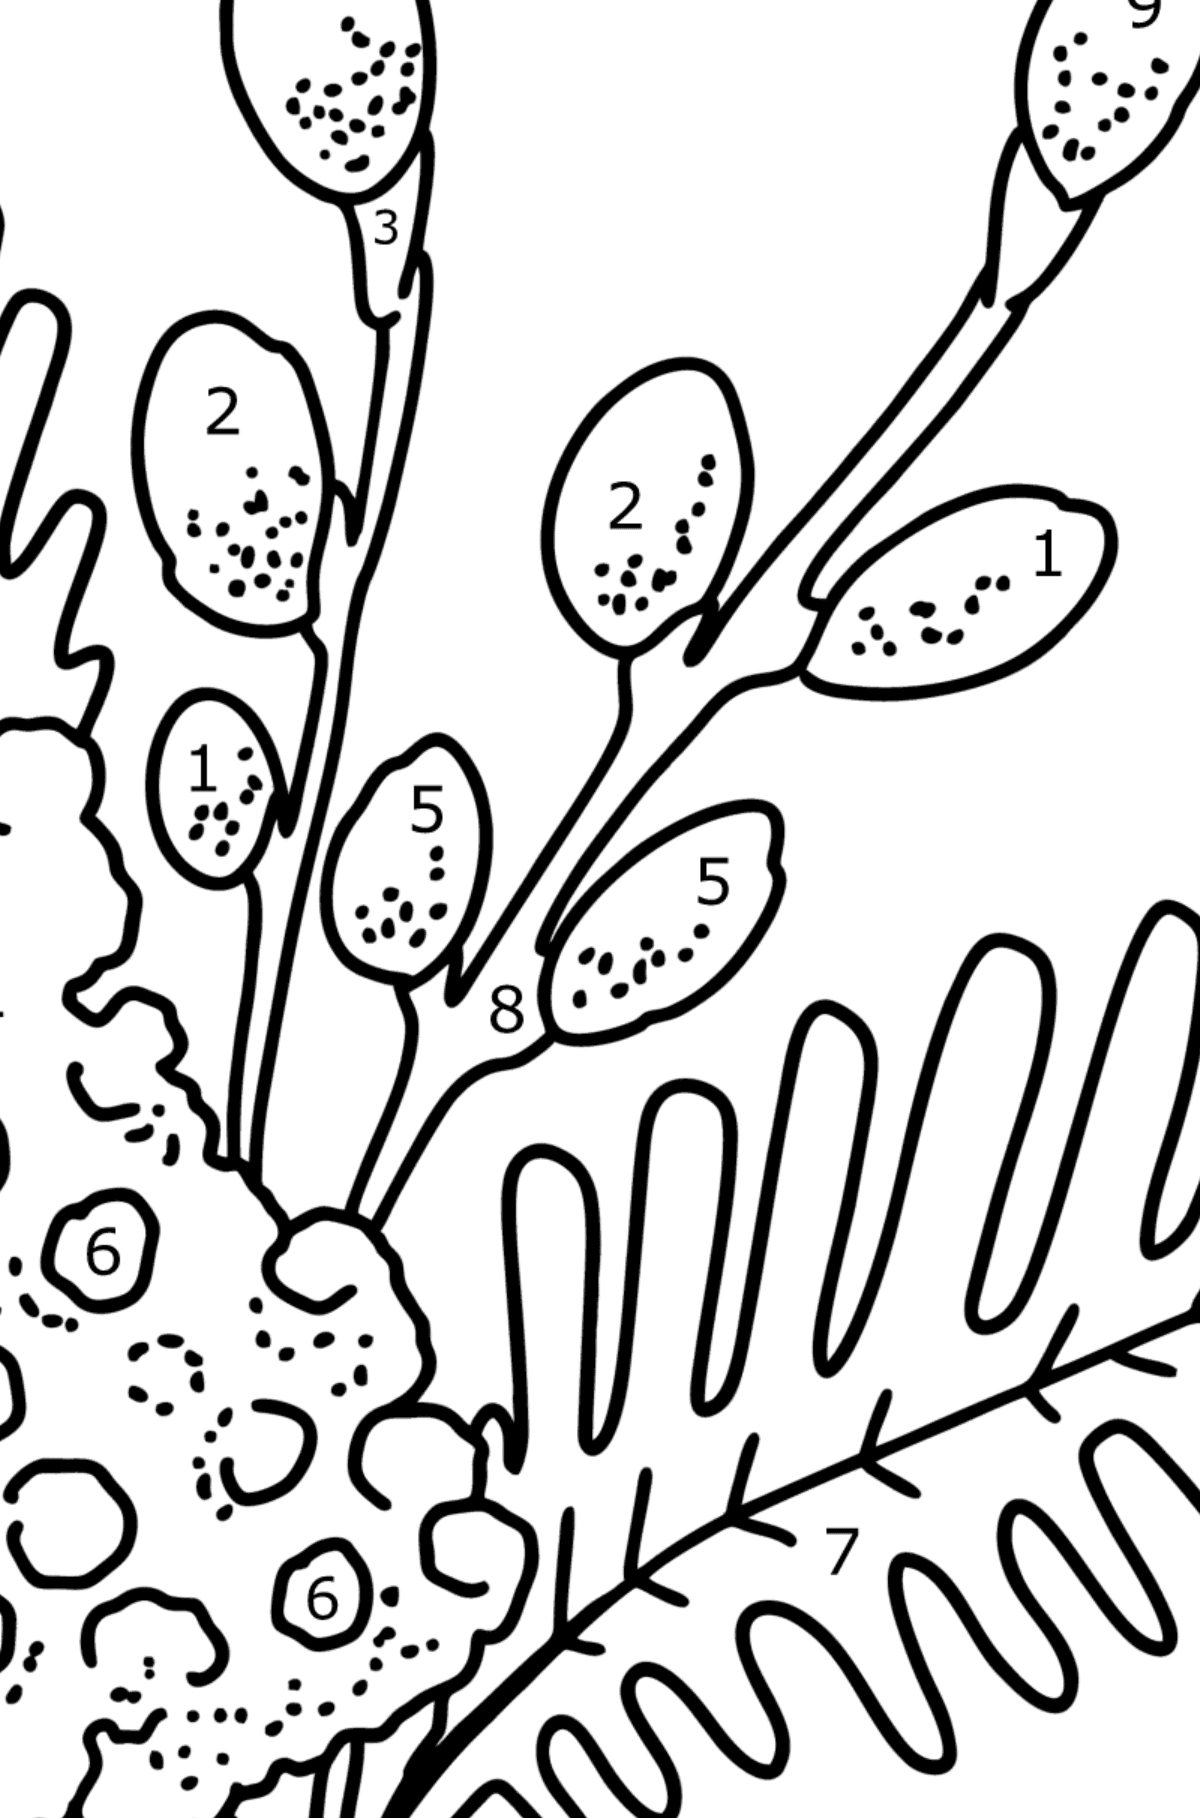 Coloring page - Mimosa and Pussy Willow - Coloring by Numbers for Kids